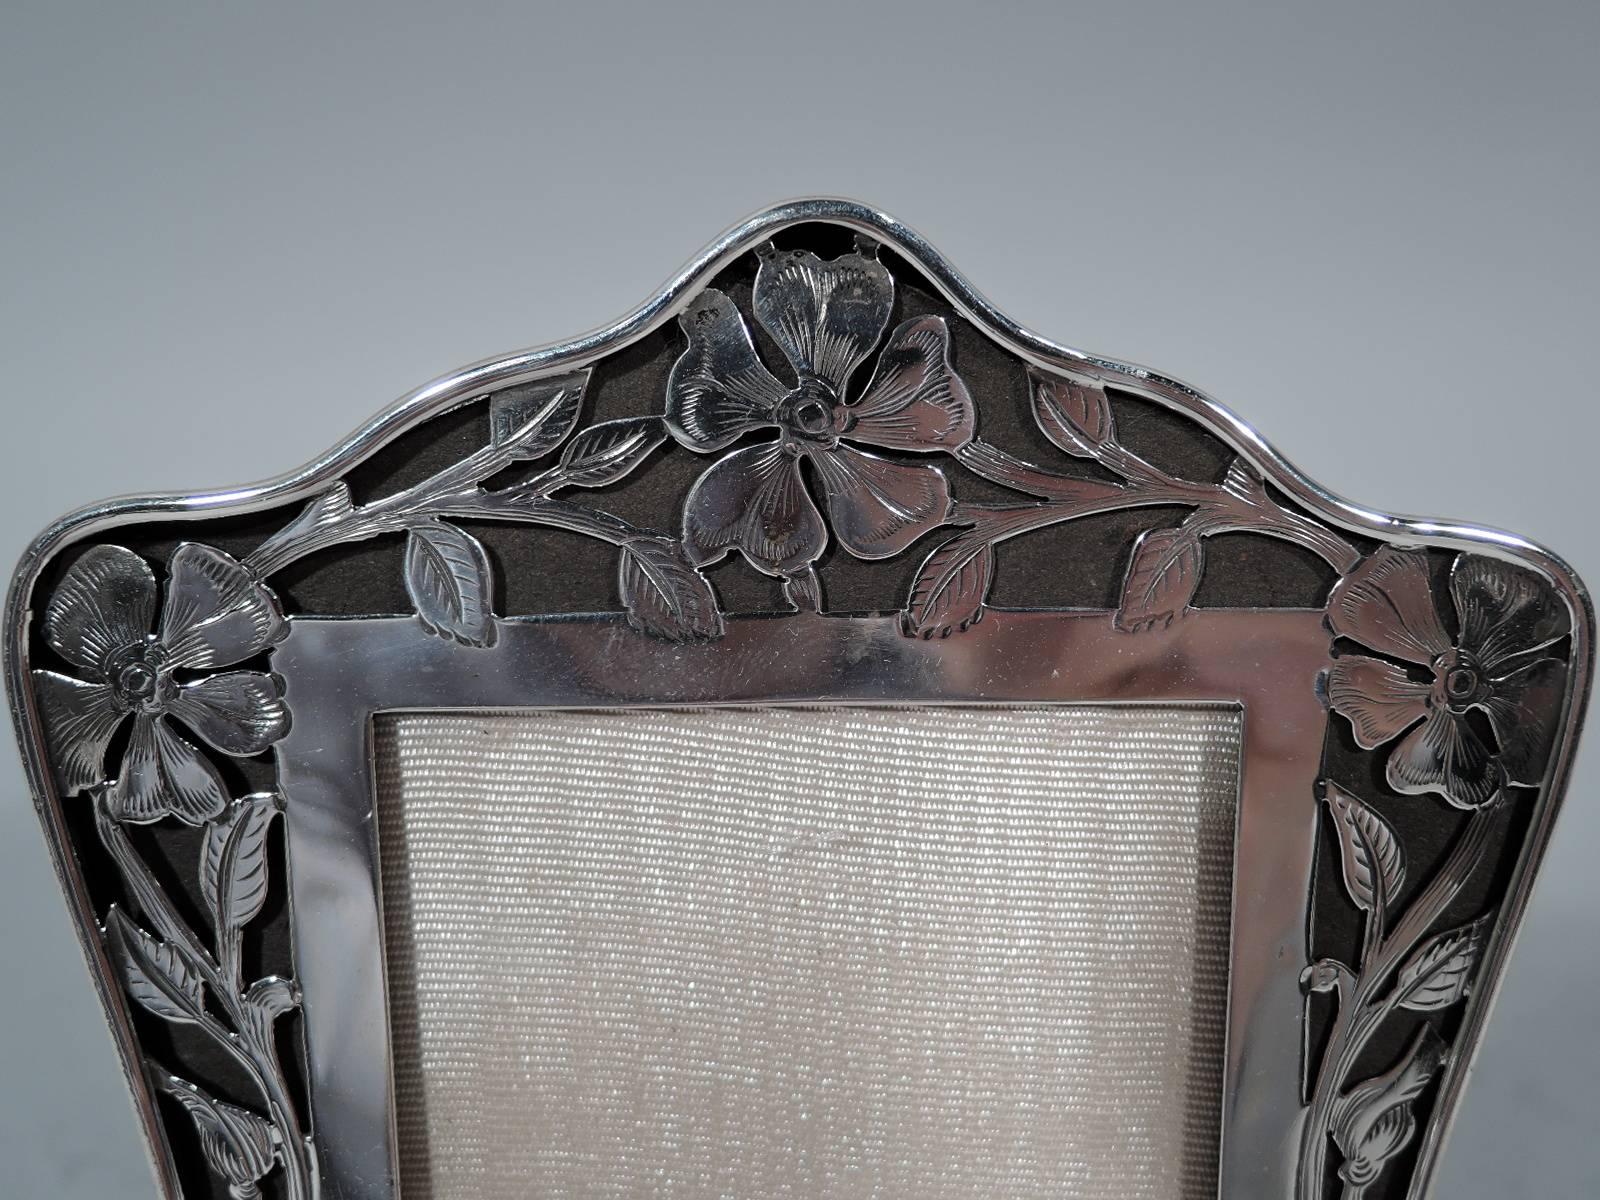 Art Nouveau sterling silver picture frame. Rectangular window in shaped frame with wavy arched top, concave sides, and bracket feet. Window surrounded by pierced floral border over brown ground. At bottom vacant oval. With glass, silk lining, and